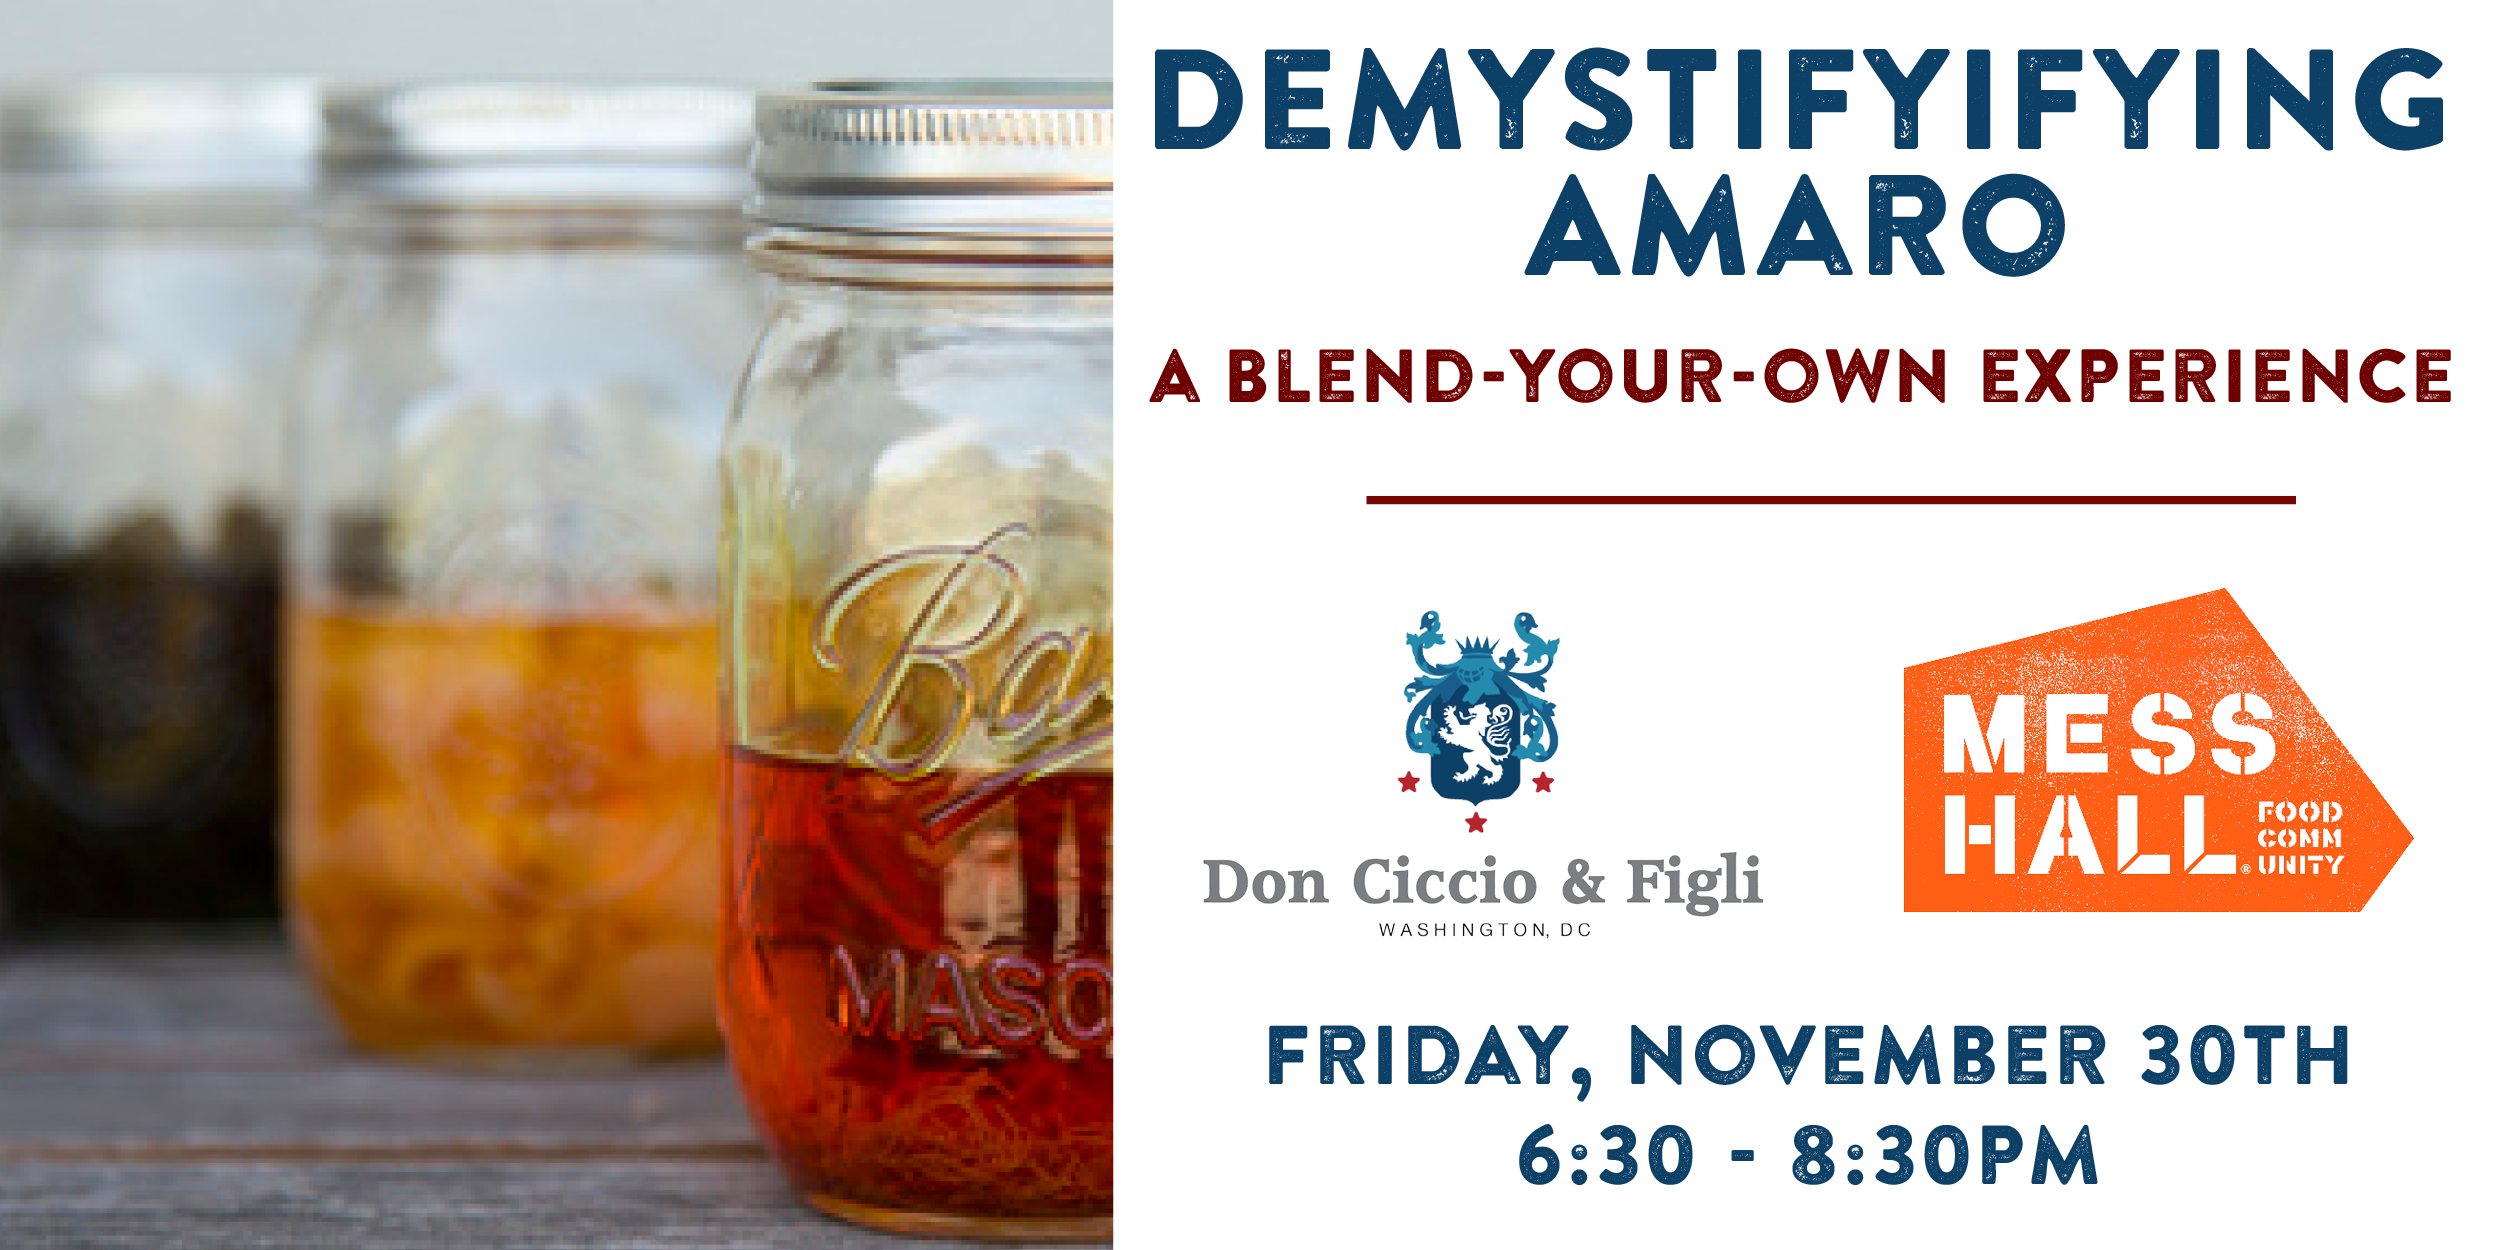 Demystifying Amaro, Friday, November 30th - Click for tickets